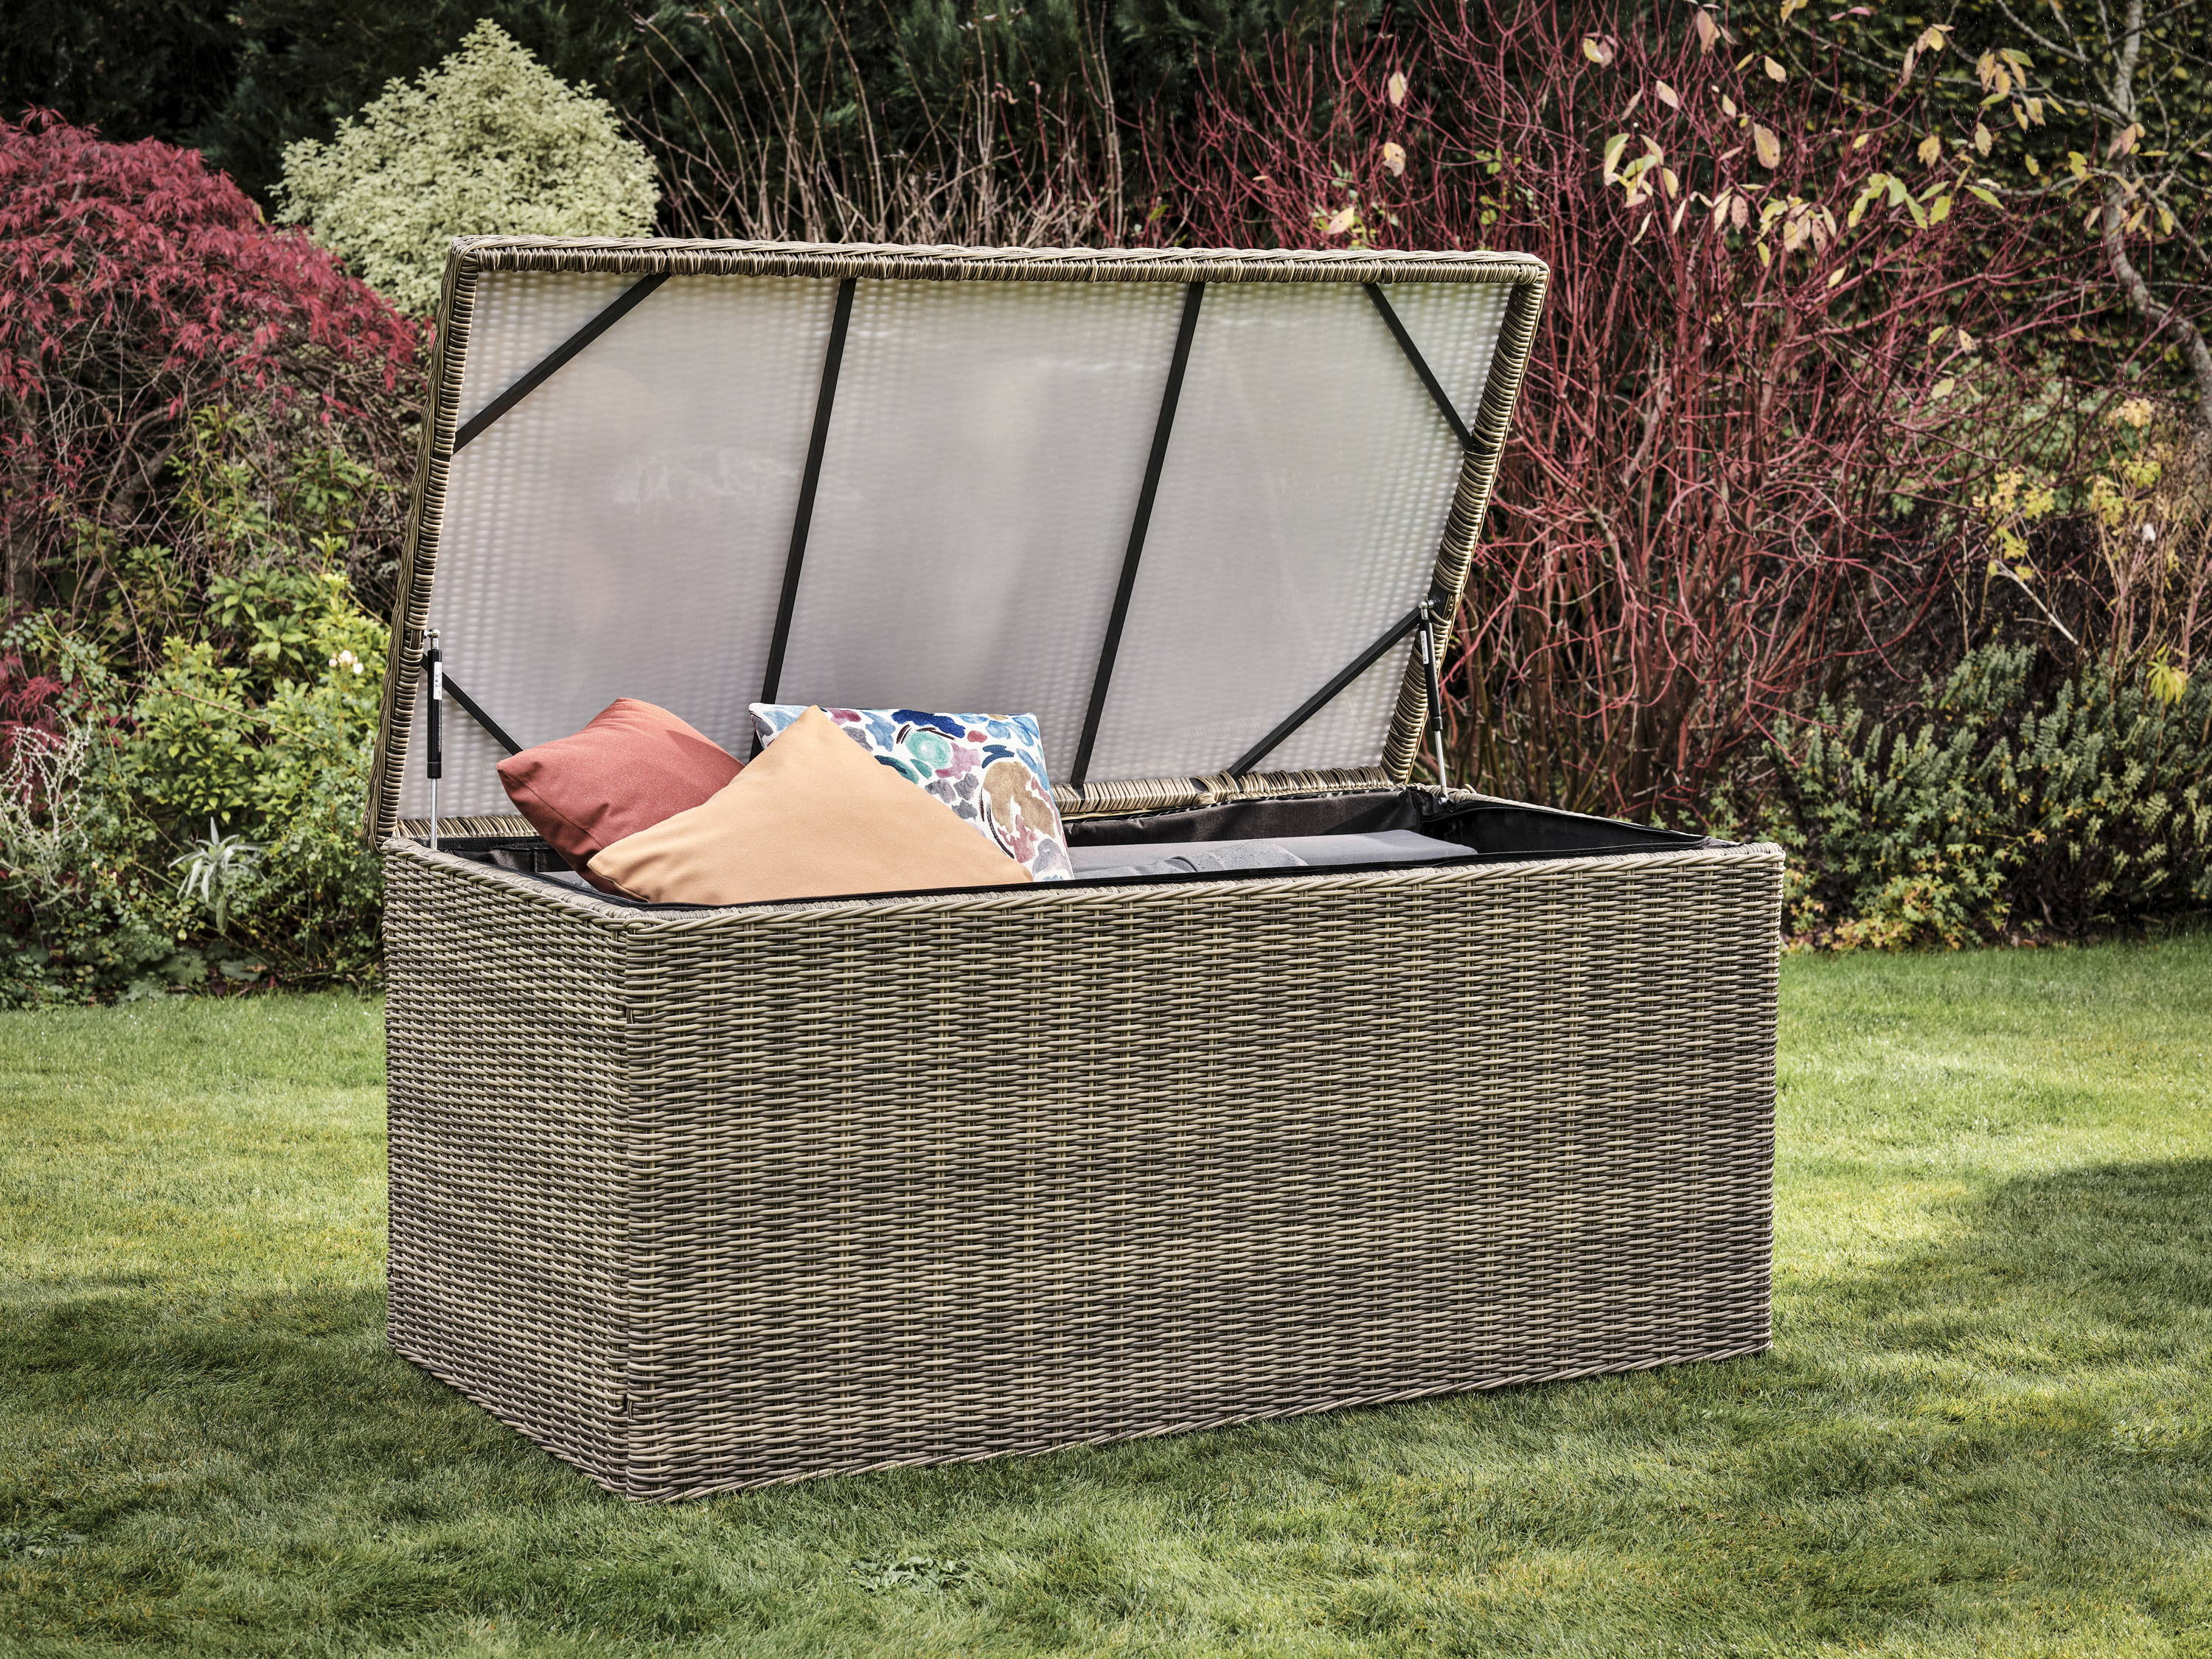 Open rattan storage box filled with cushions in a garden.